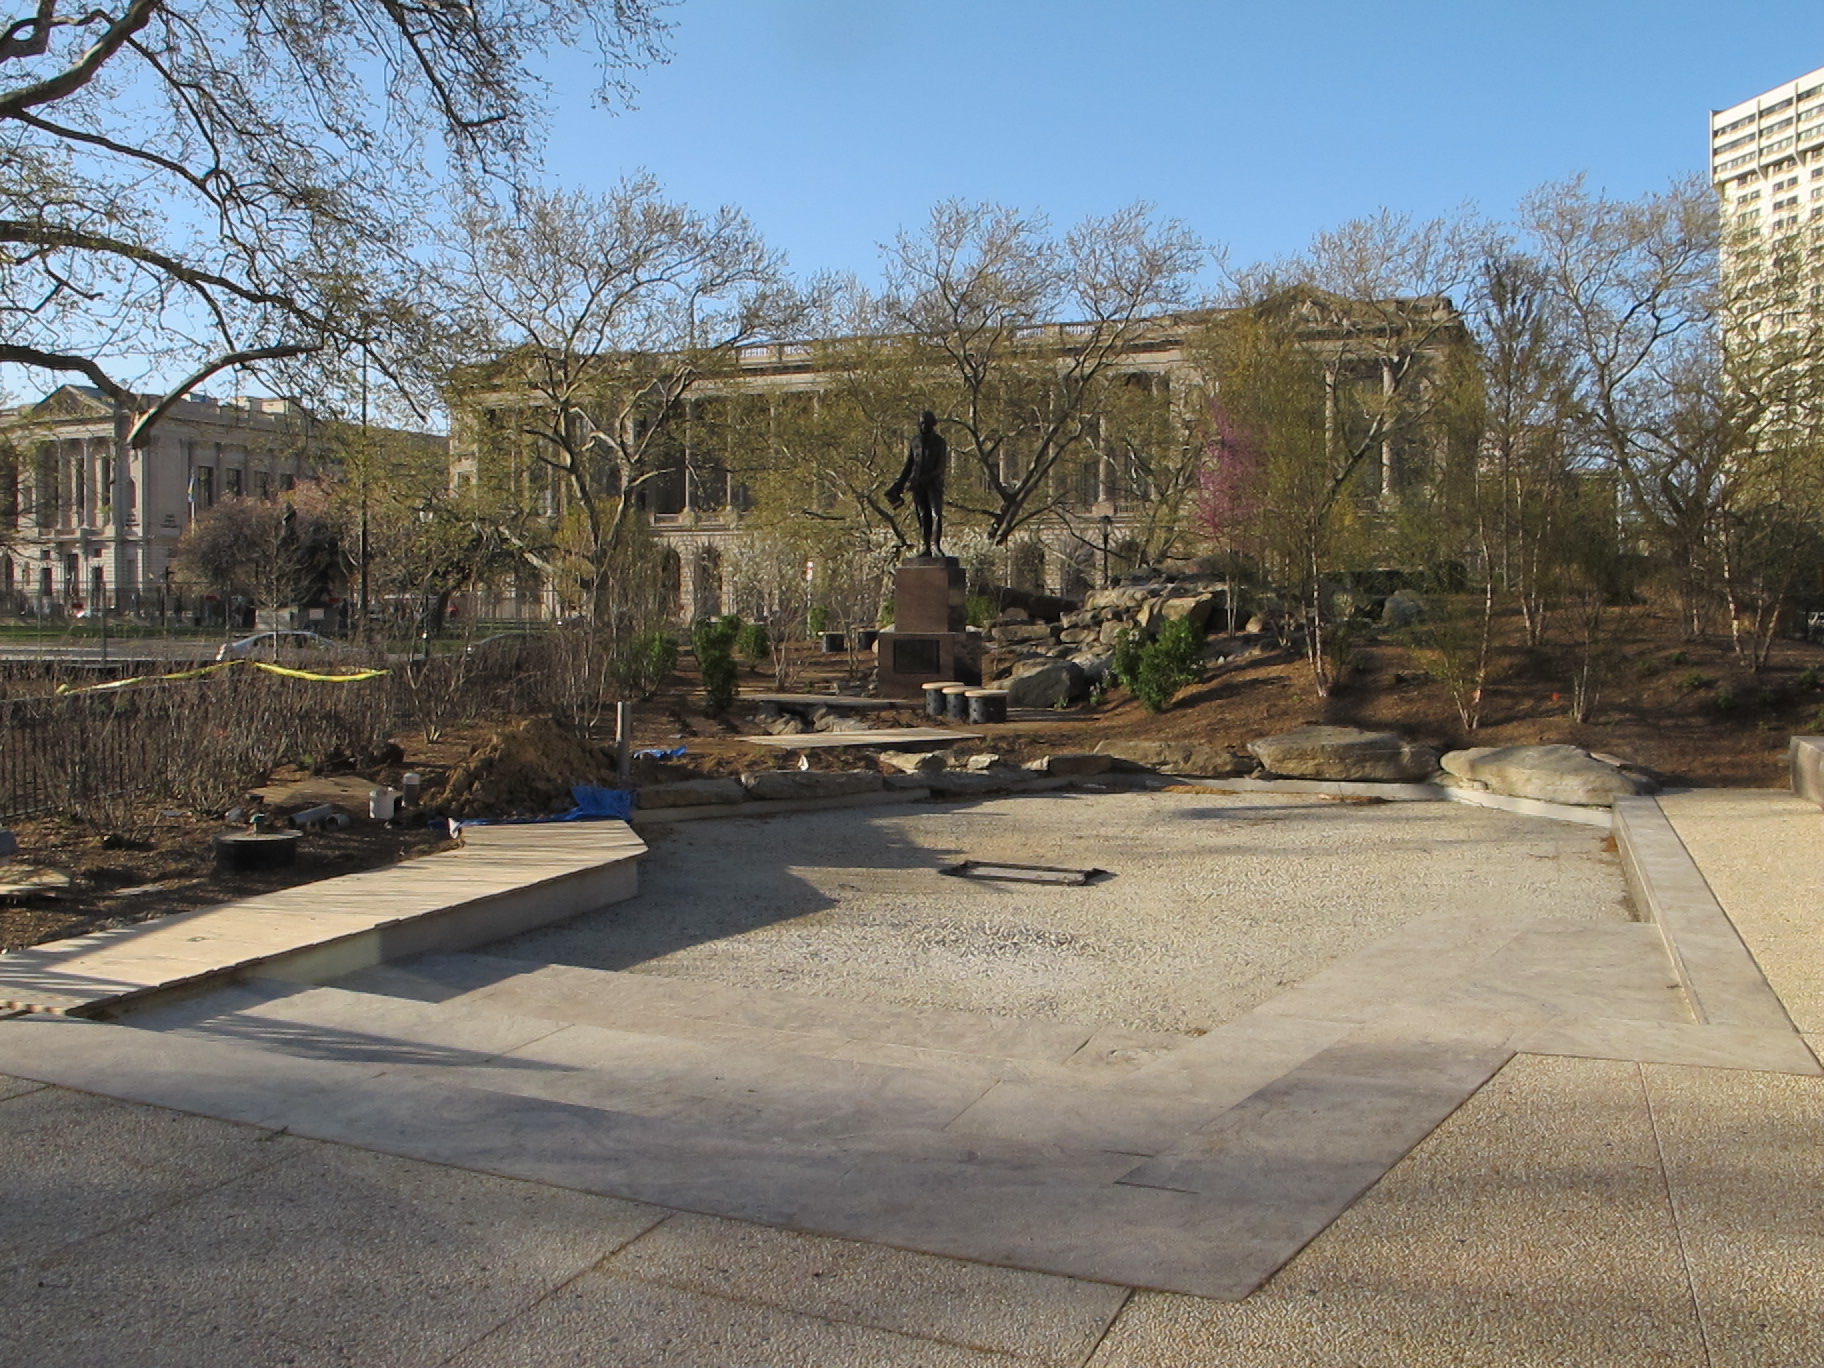 The children's discovery garden and boat pond in the new Sister Cities Park.